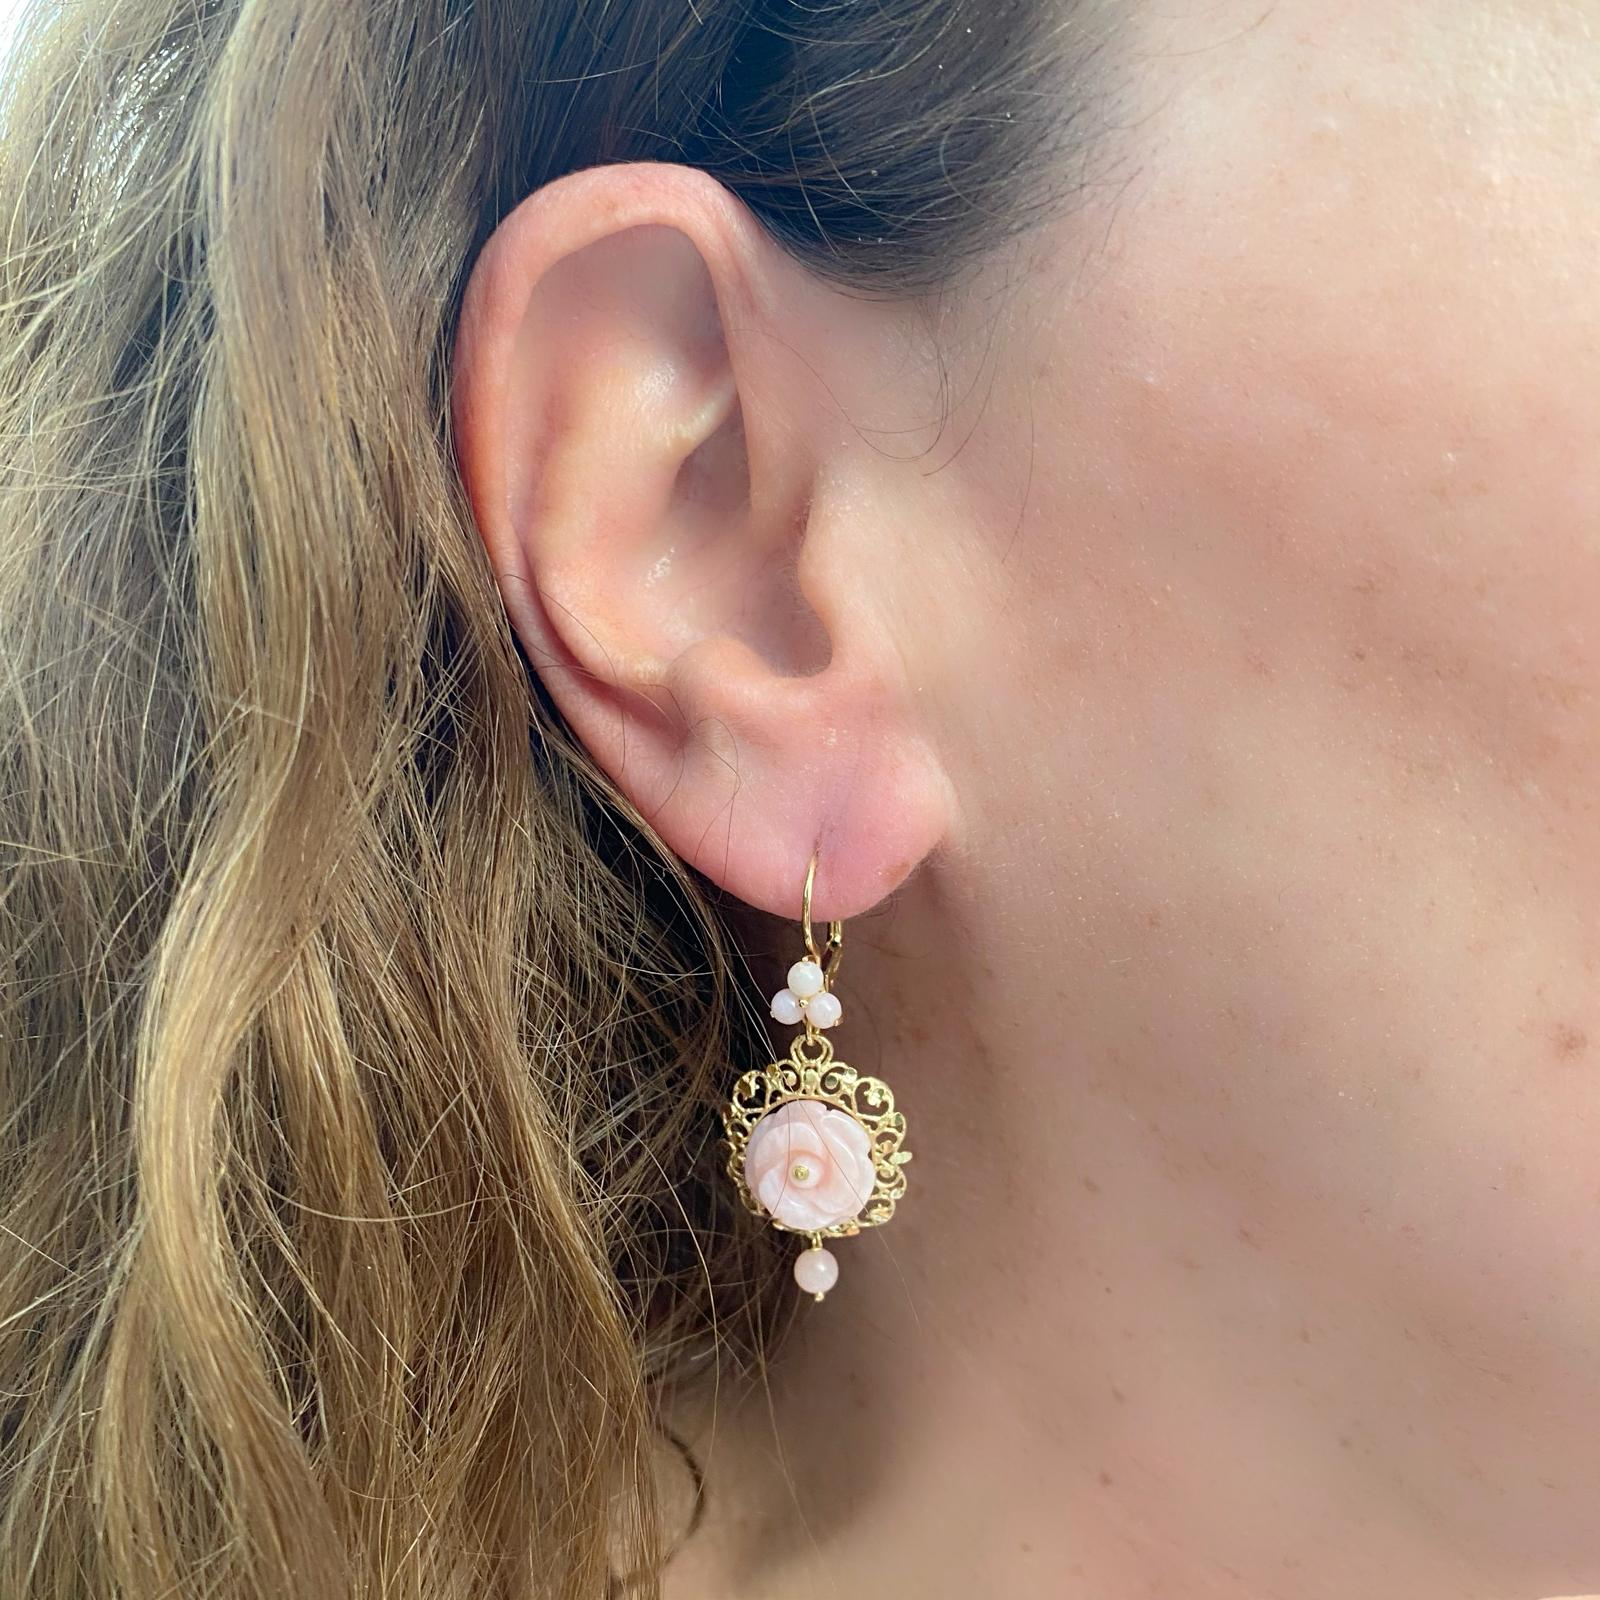 High fashion for every day! These 18k gold drop earrings by Dolce & Gabbana are designed with carved pink jade flowers in a filigree frame, and accented by pink jade beads and with lever-backs. The earrings weigh 6.3 grams and measure 1 1/2in. long.